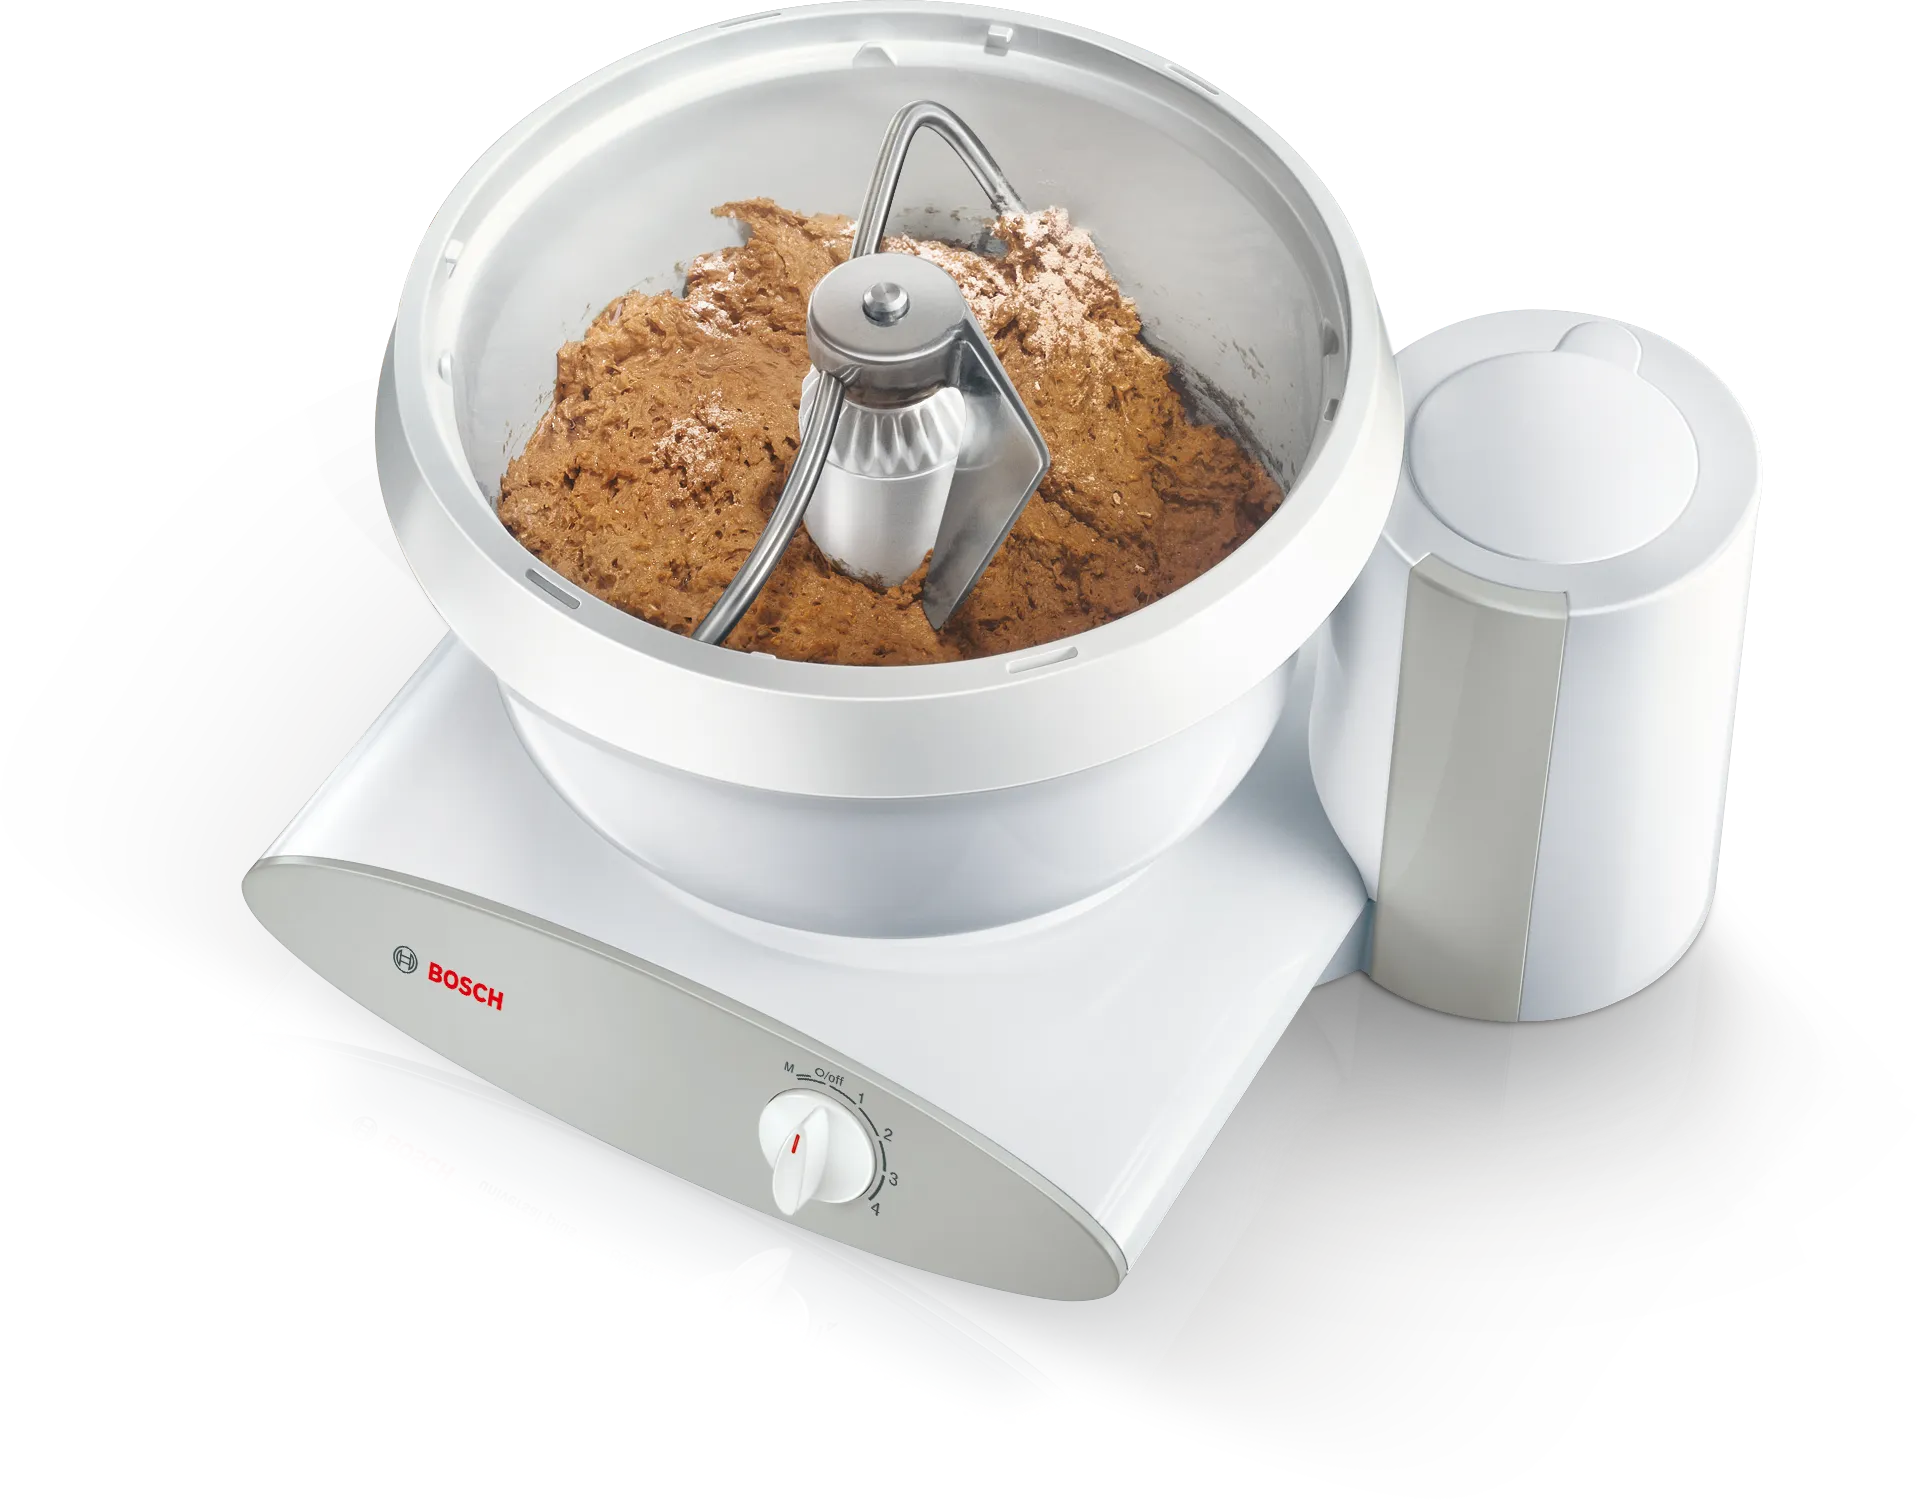 Bosch Universal Plus Cookie Paddles for tasty treats!